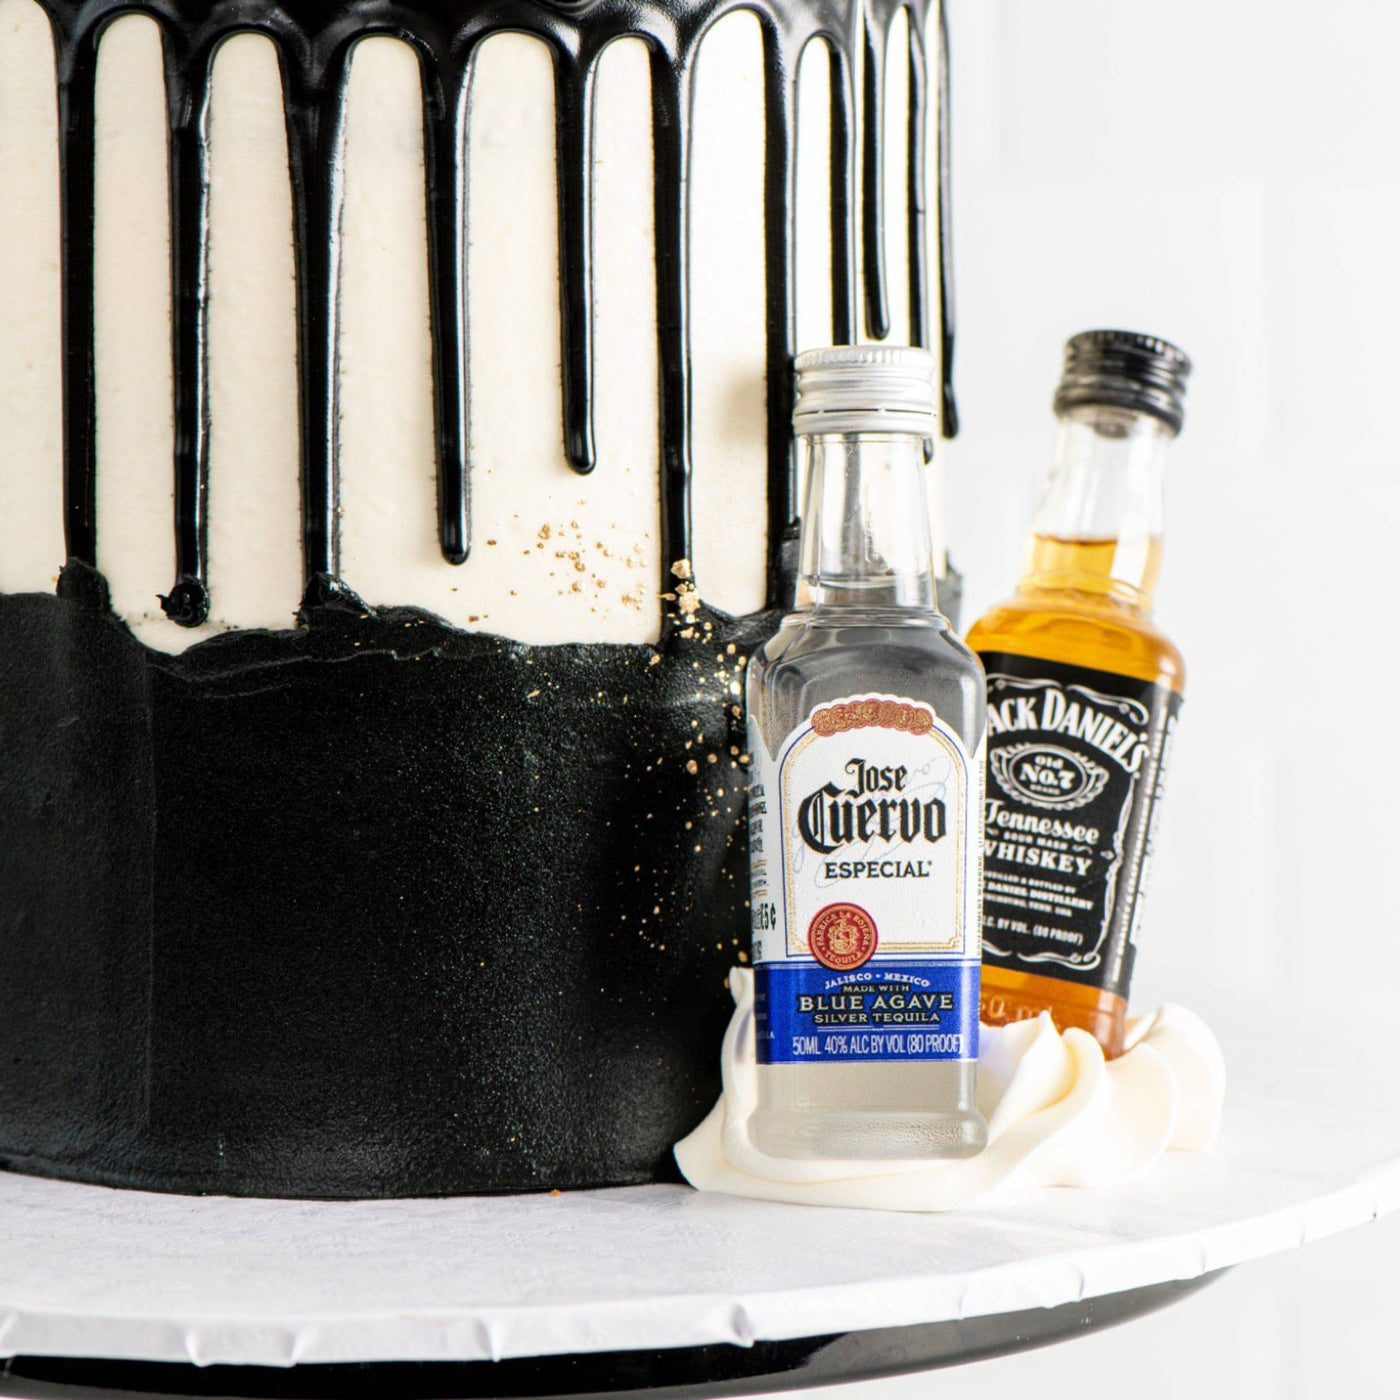 Teacher's Scotch Whisky Cake Delivery in Delhi NCR - ₹1,649.00 Cake Express